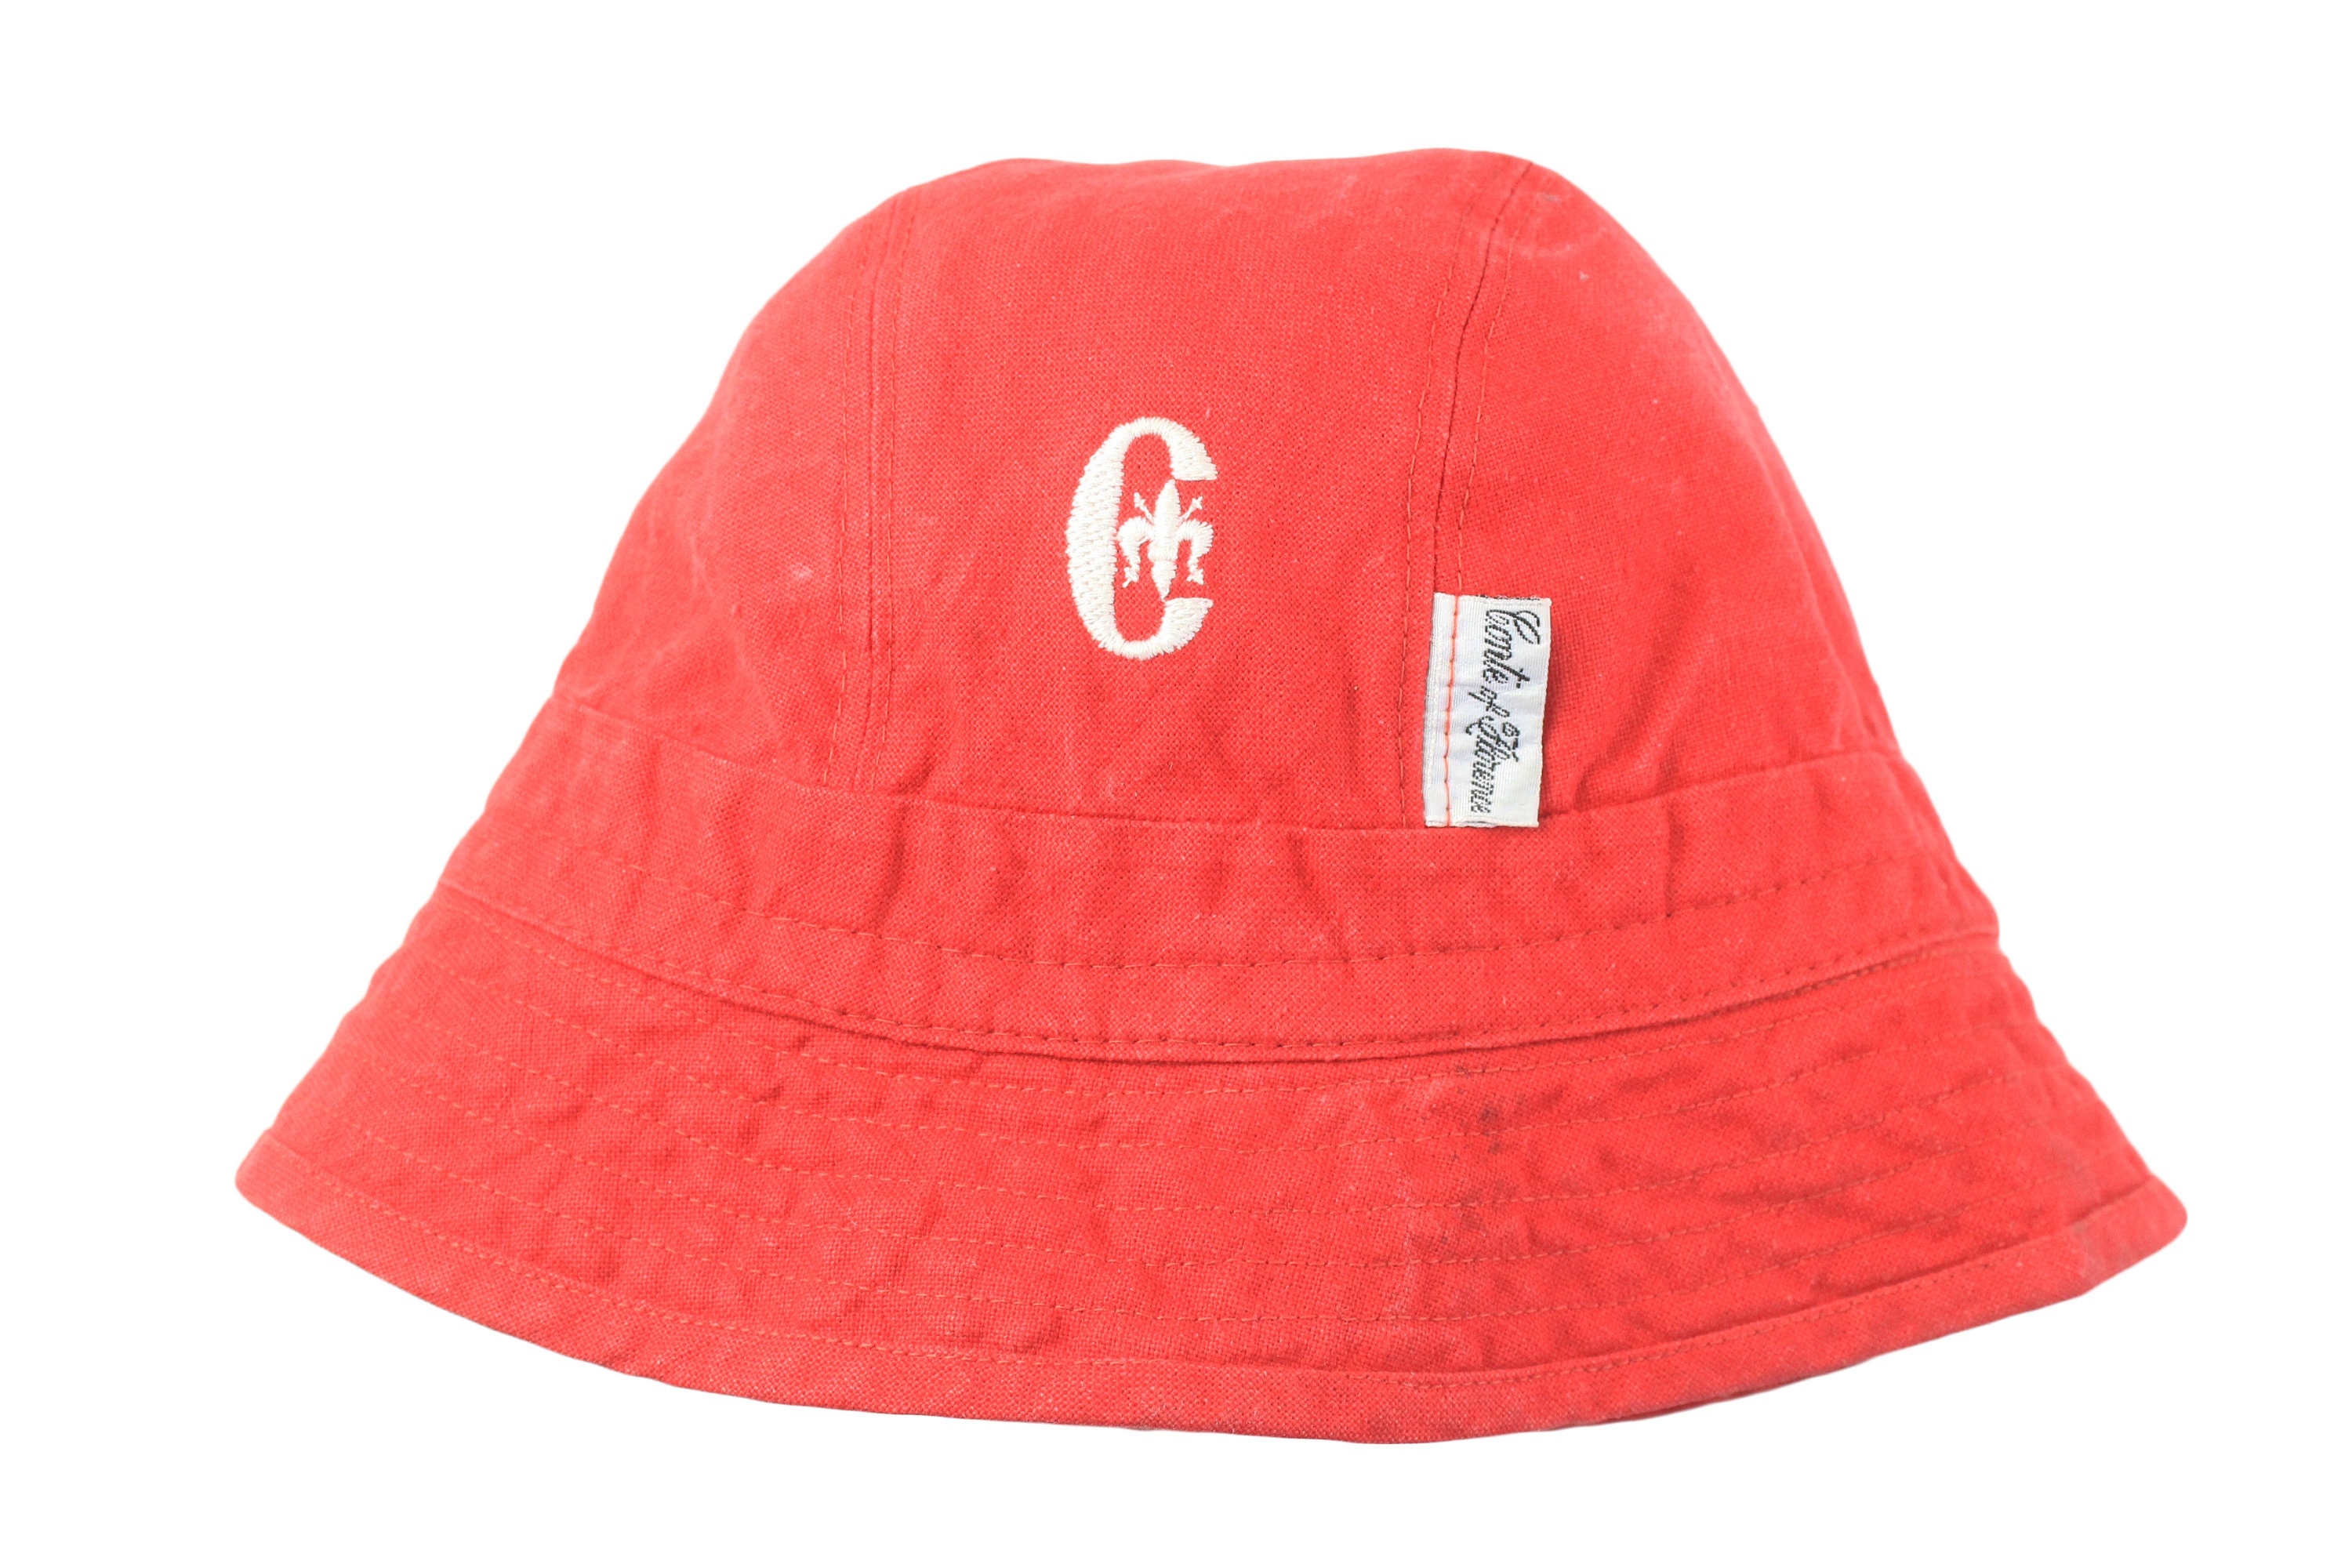 Vintage Conte of Florence Bucket Hat Casual Style Red Small Logo